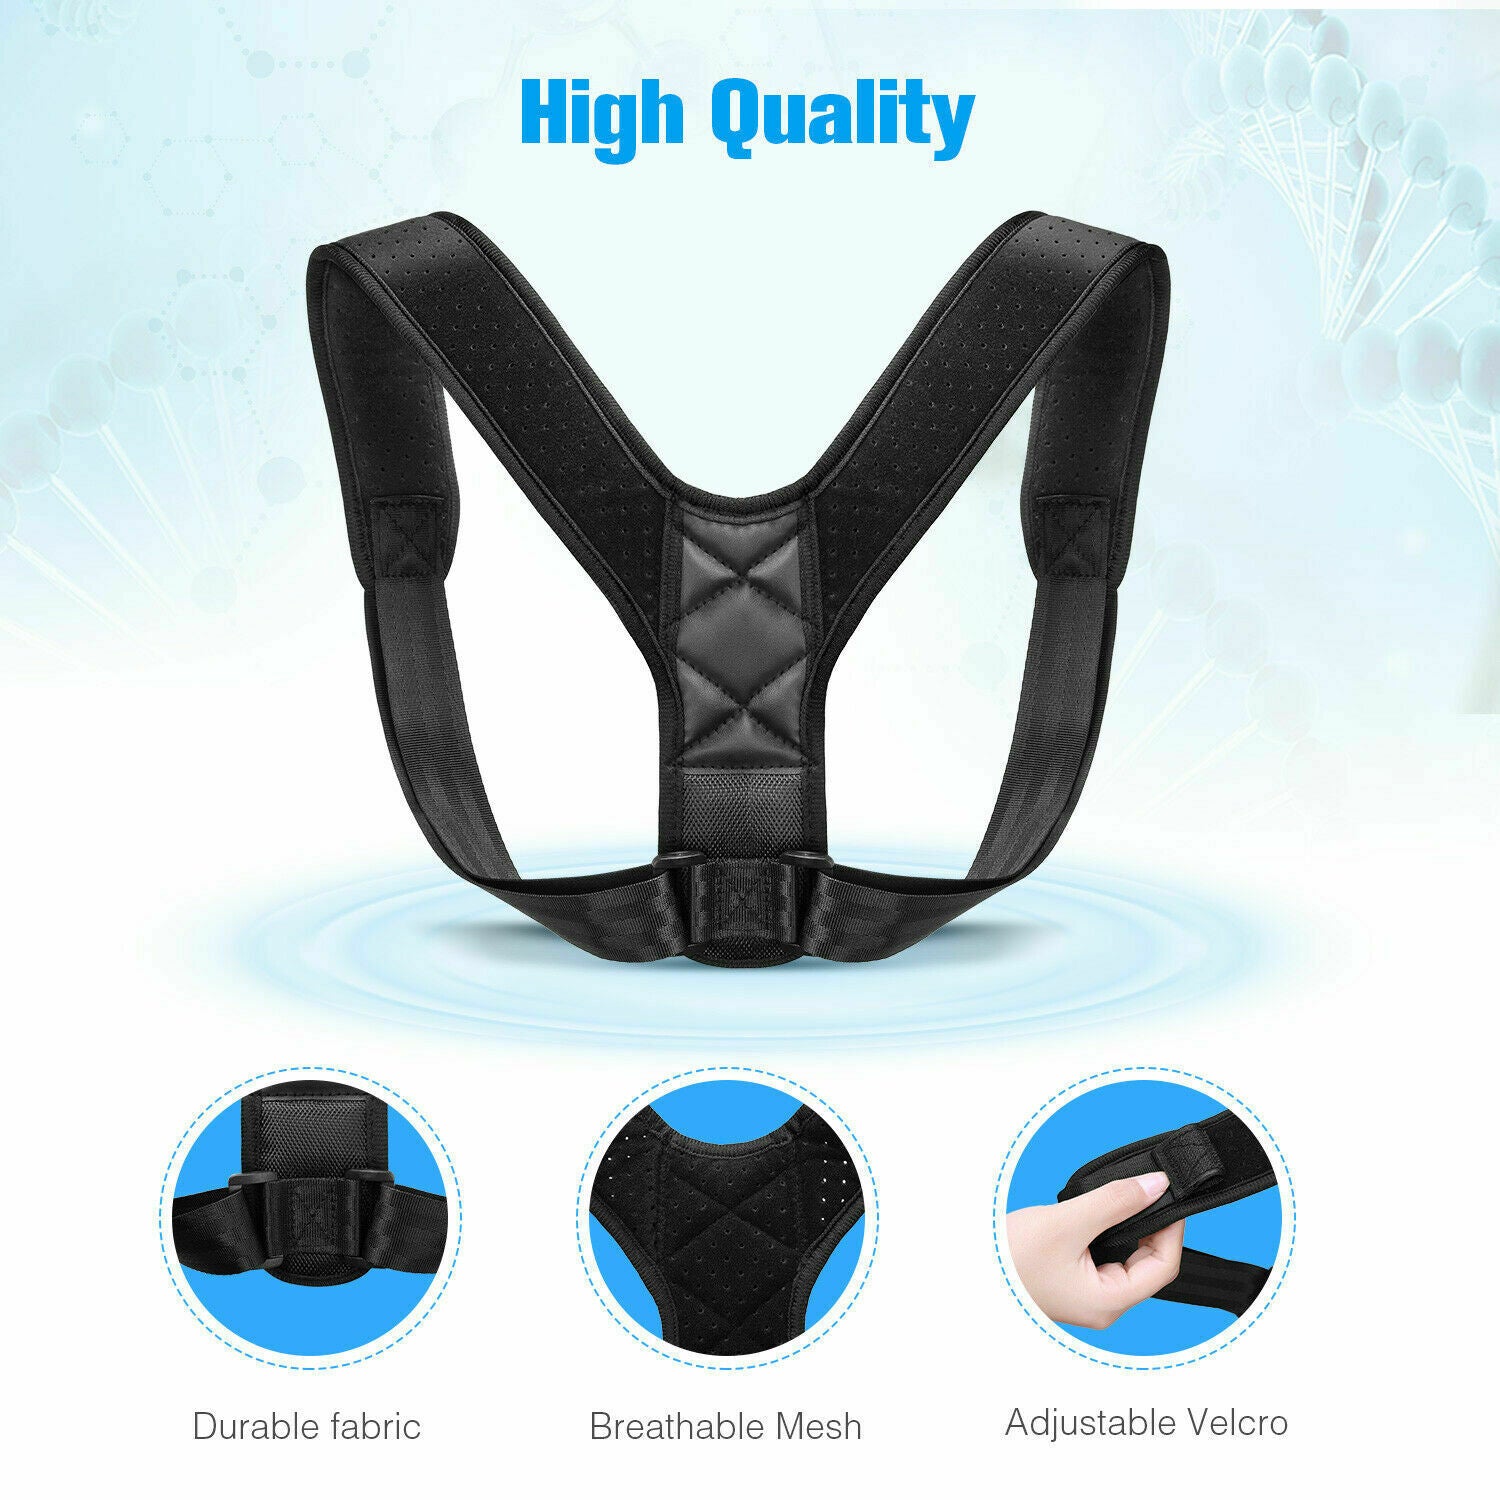 Posture Corrector for Men and Women- Upper Back Brace with